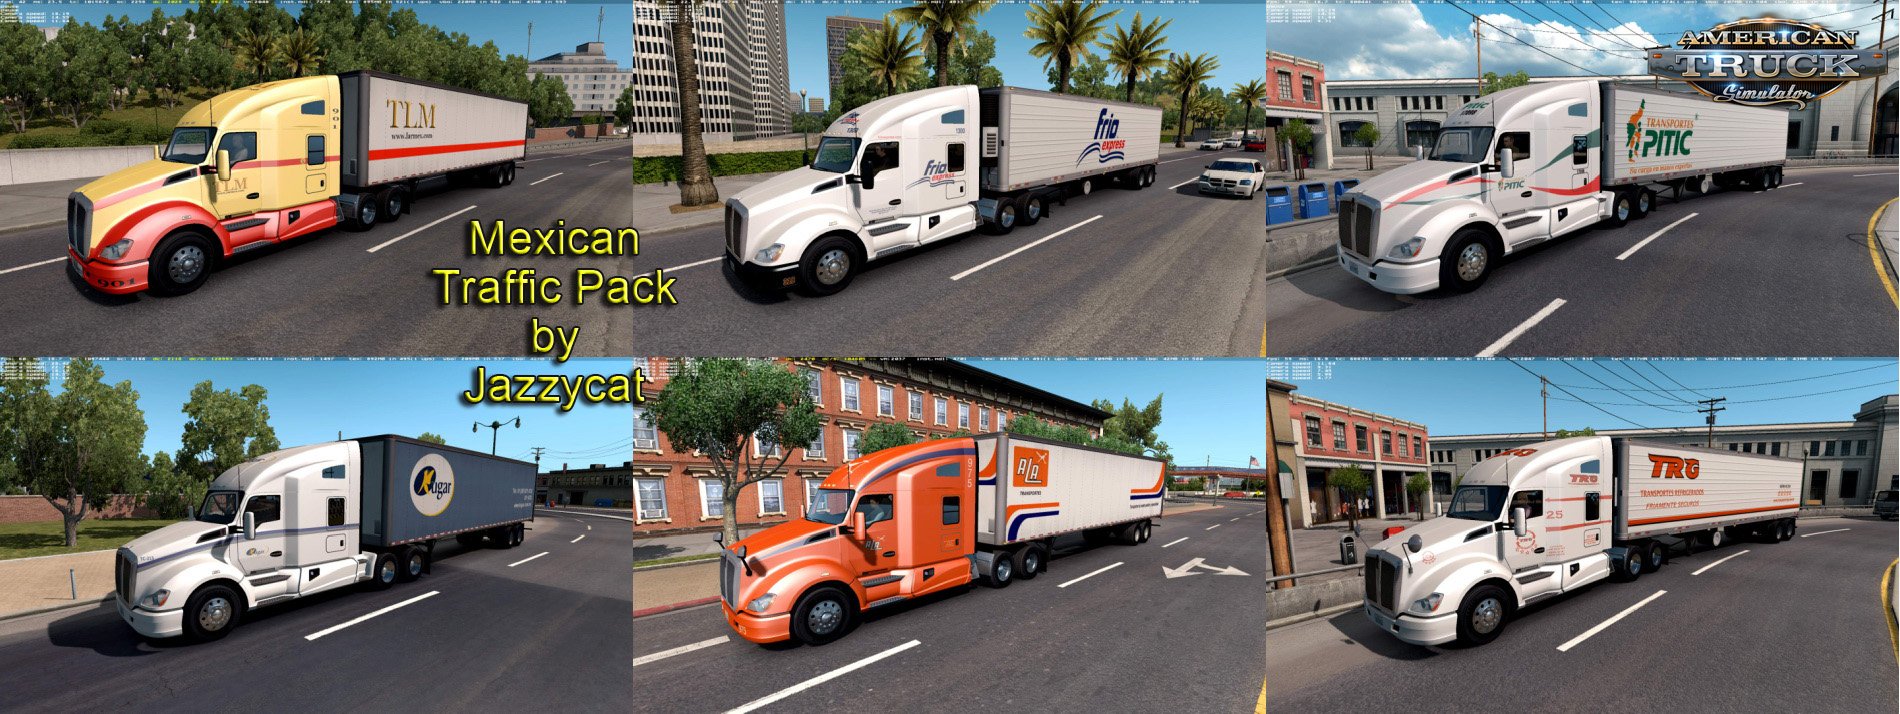 Mexican Traffic Pack v1.6 by Jazzycat